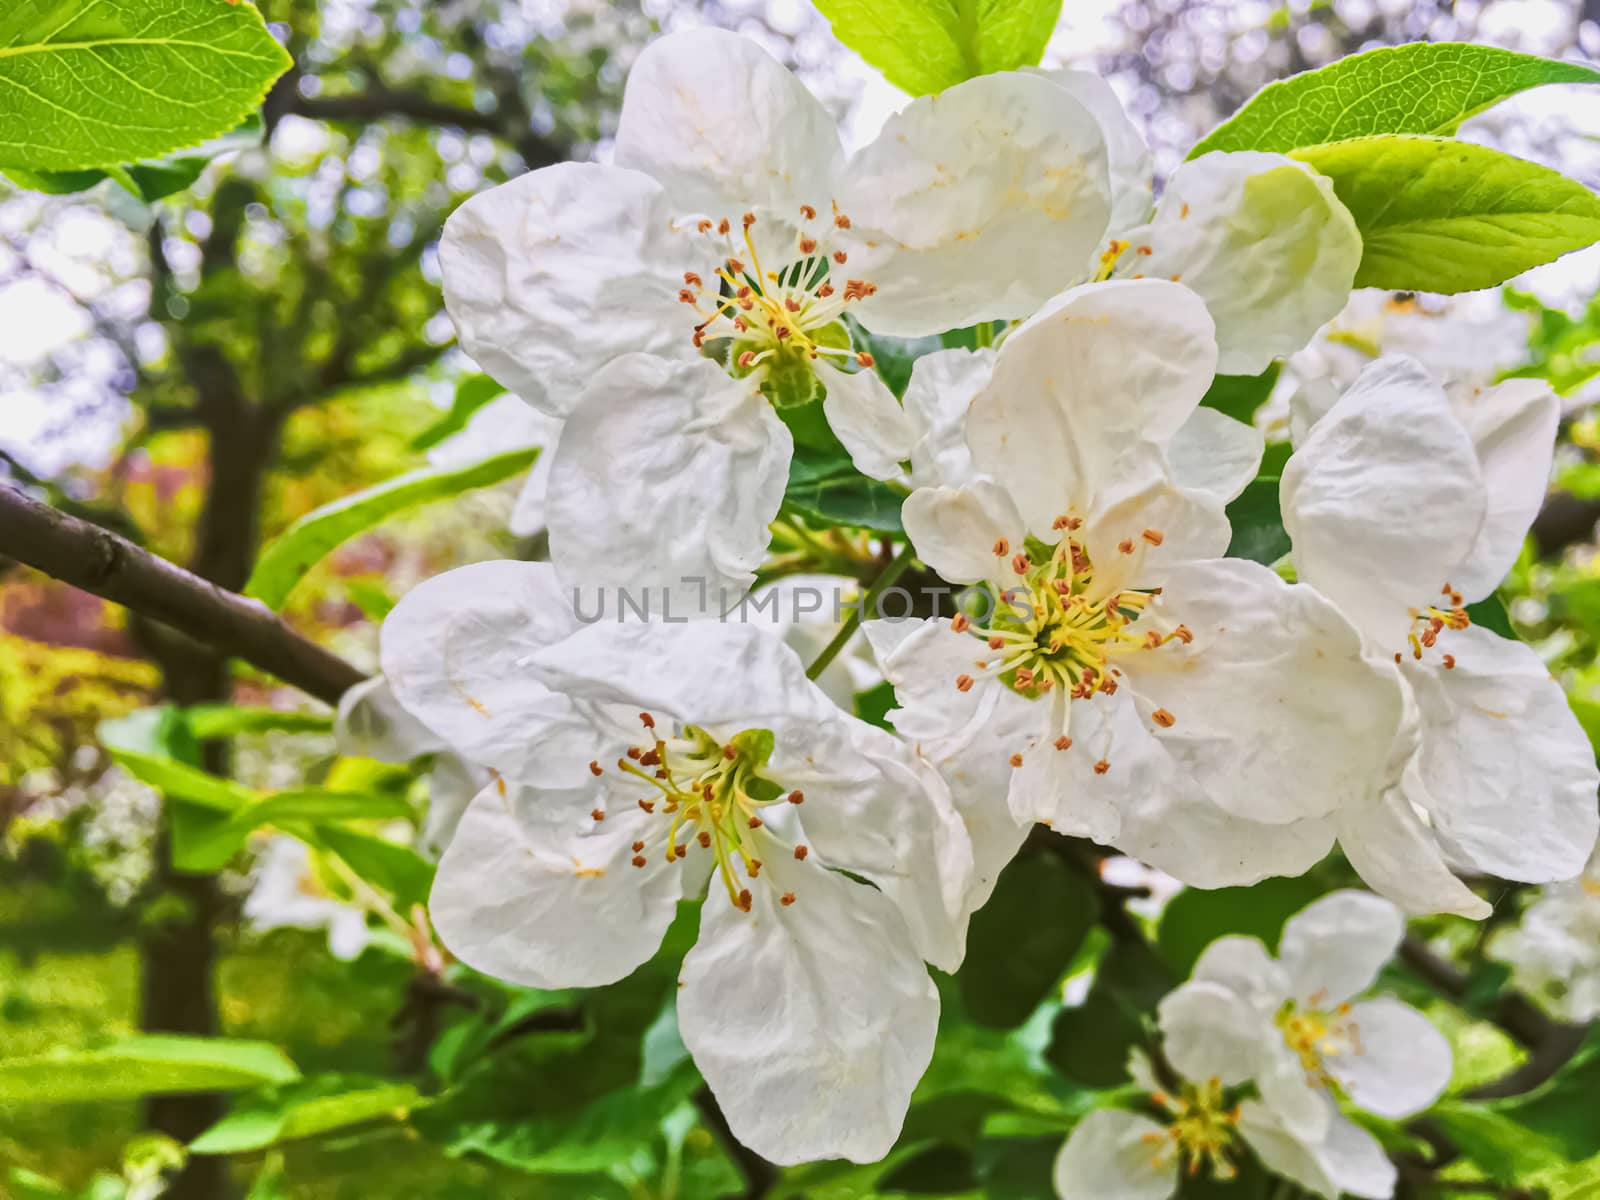 Blooming apple tree flowers in spring garden as beautiful nature landscape, plantation and agriculture by Anneleven